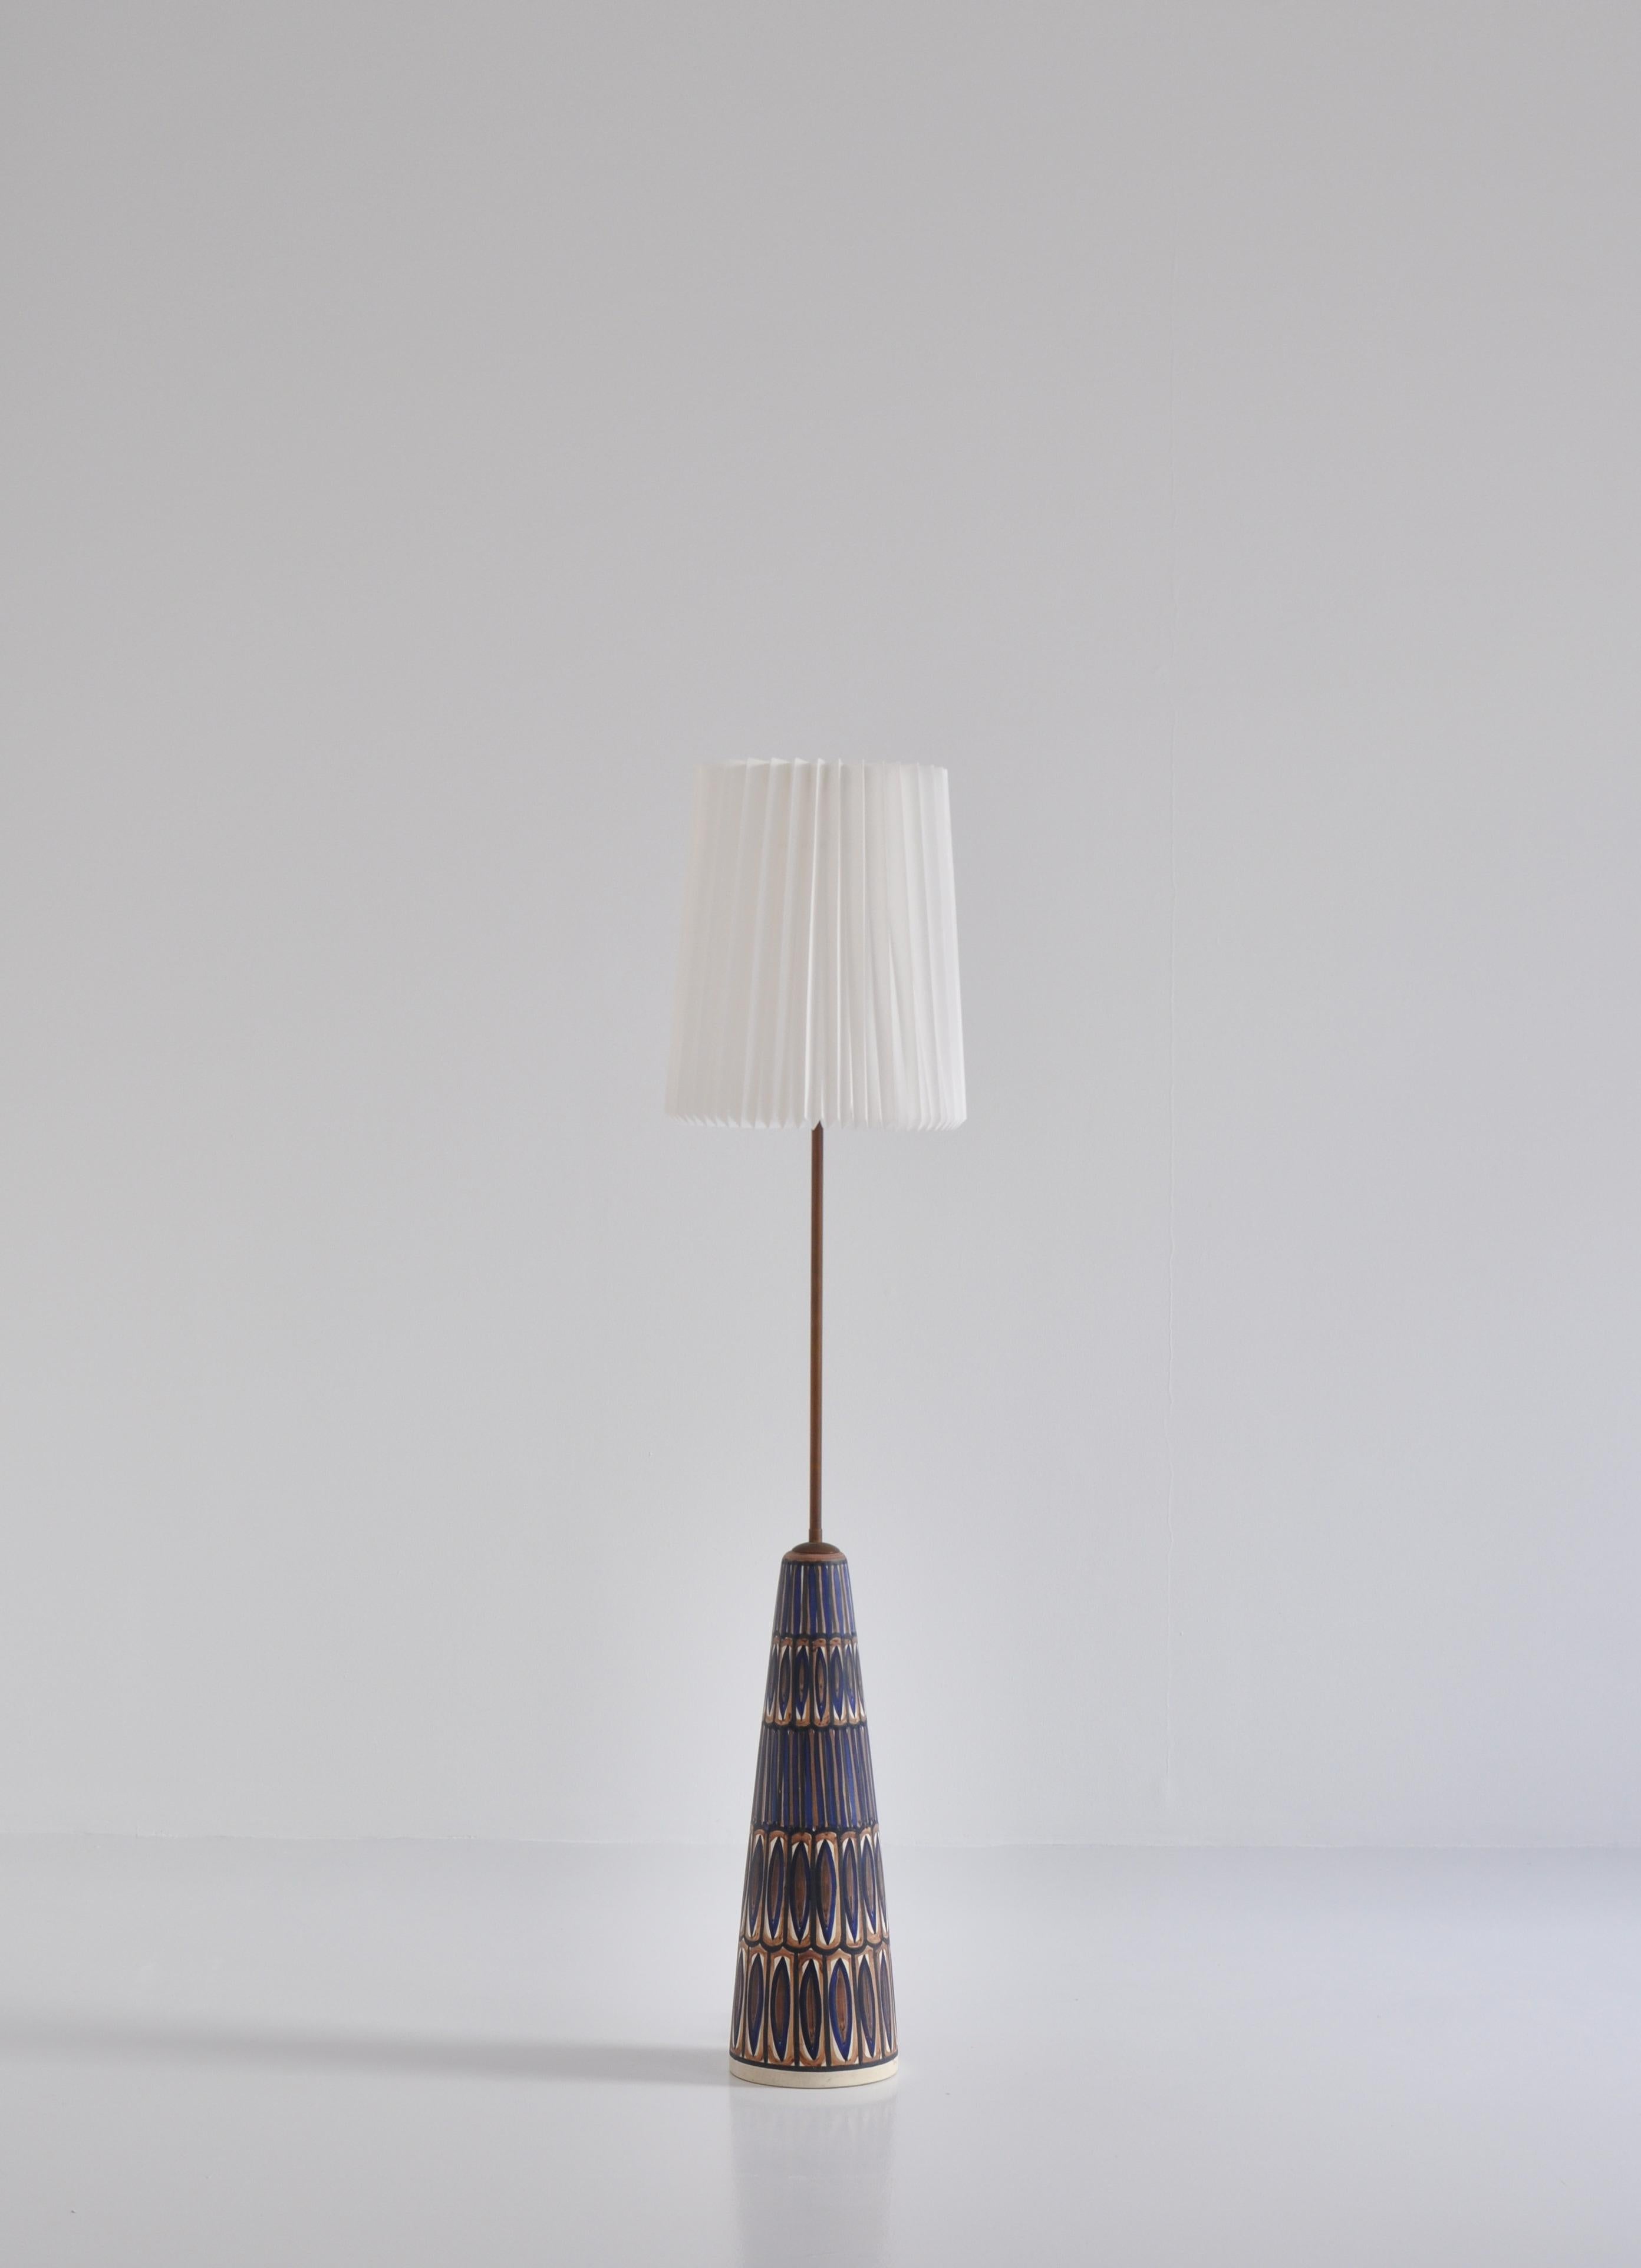 Hand painted floor lamp from the 1960s by Danish artist Noomi Backhausen at Søholm ceramics workshop, Bornholm. The lamp has been mounted with a new hand folded acrylic Le Klint shade.
Each of these rare lamps were made by hand and are unique in